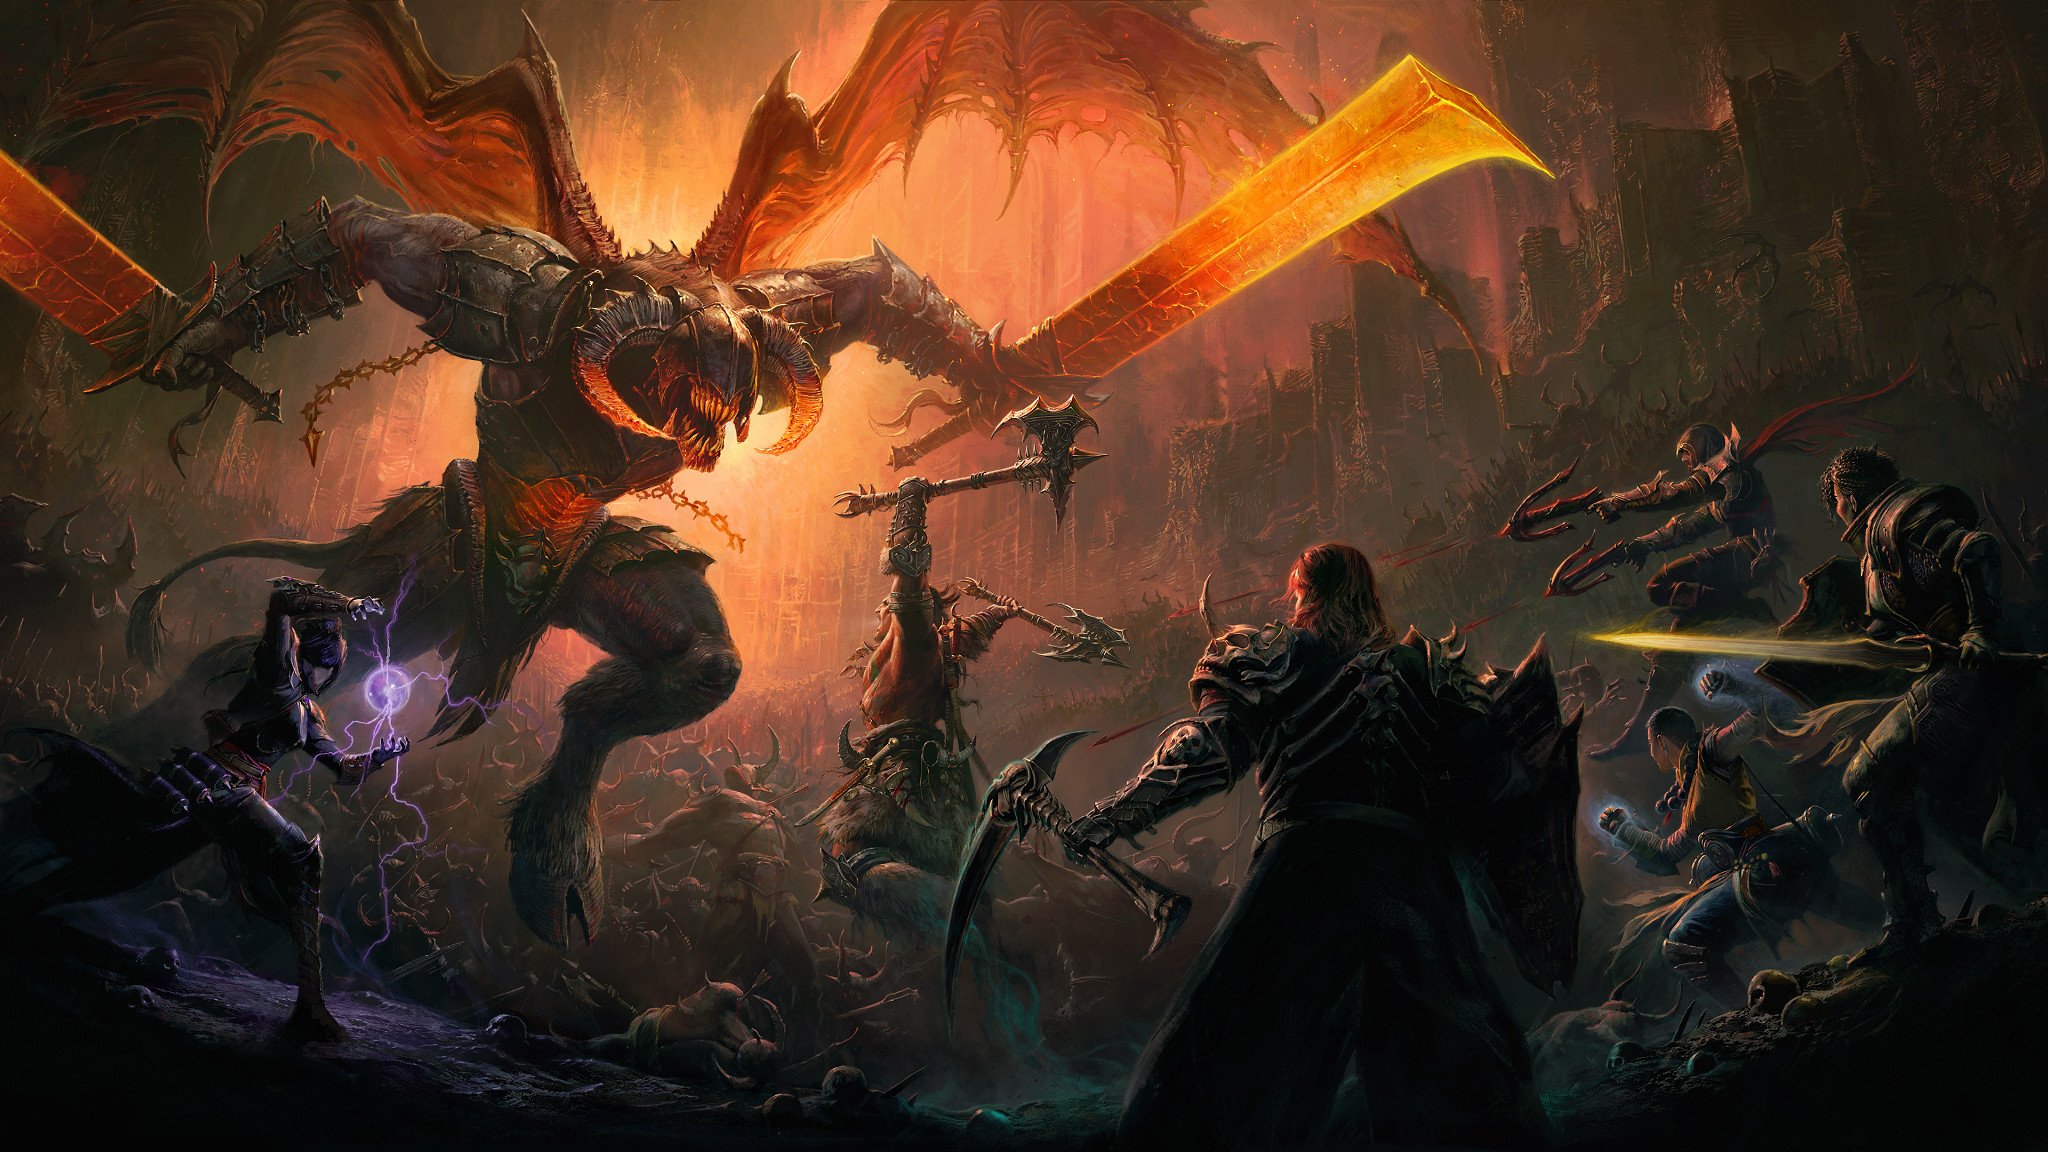 Diablo Immortal PC Beta Client Pre-Load Now Available - Wowhead News